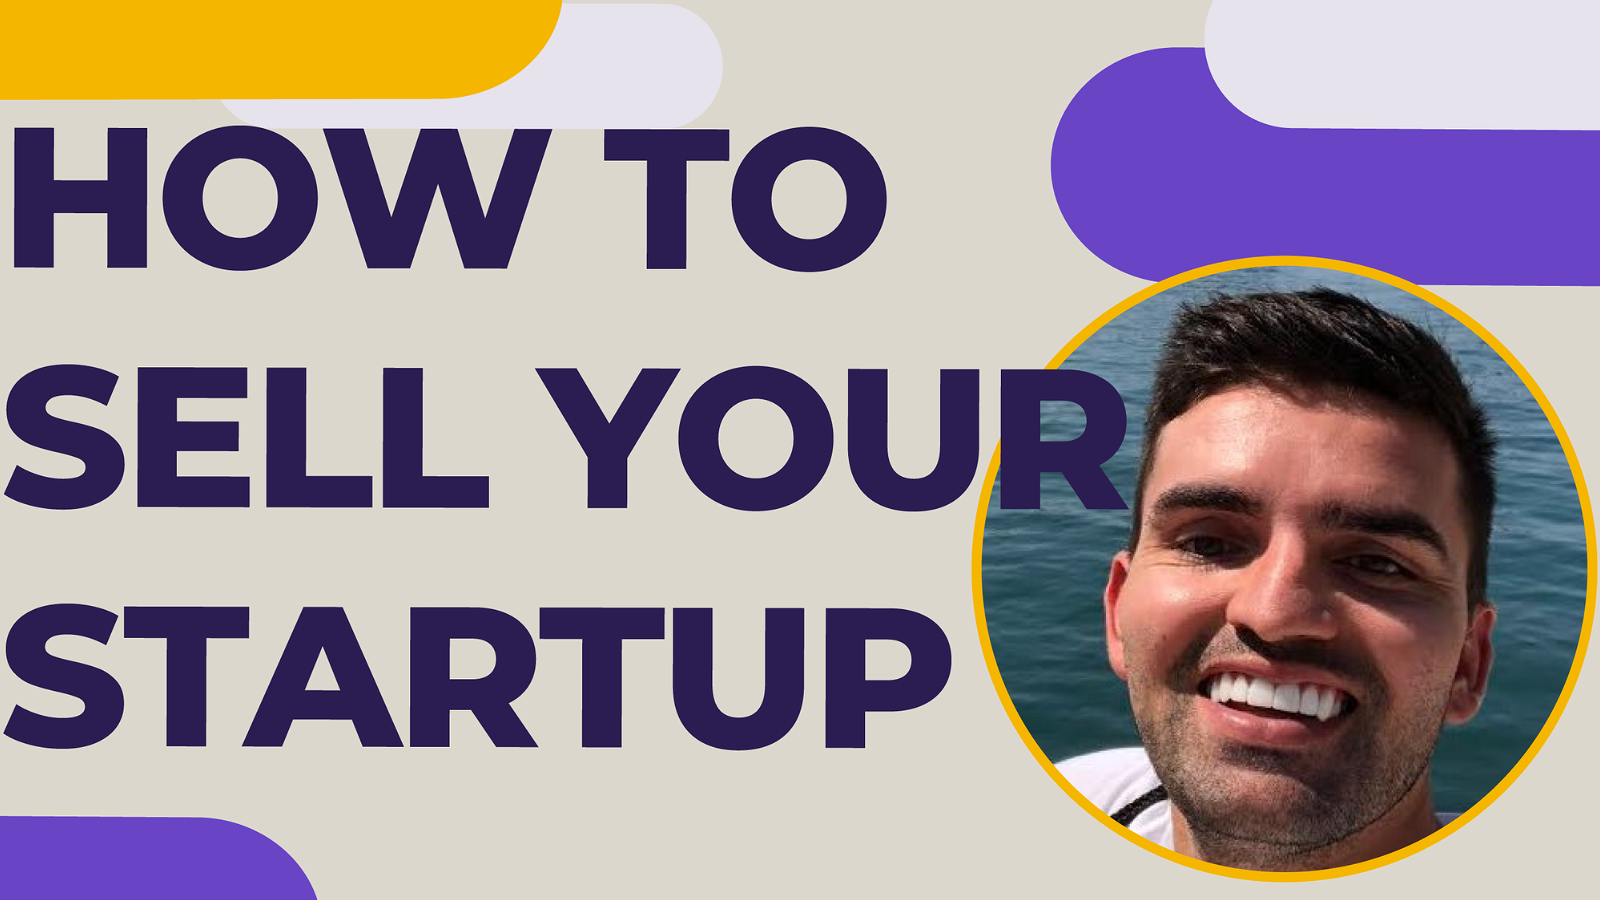 
Andrew Gazdecki: How to Sell Your Startup